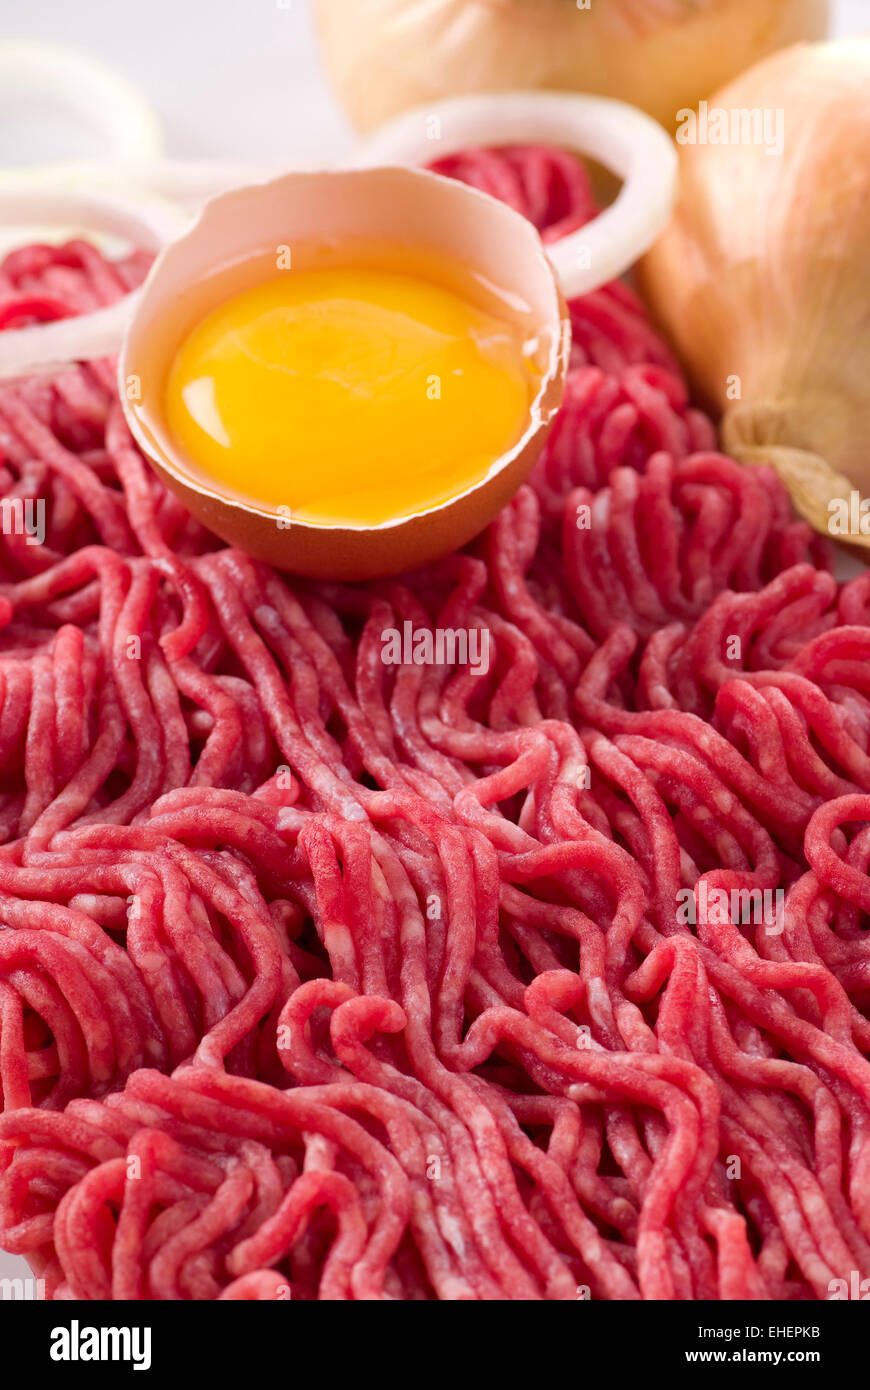 Minced meat with raw egg and onion on a plate. Stock Photo